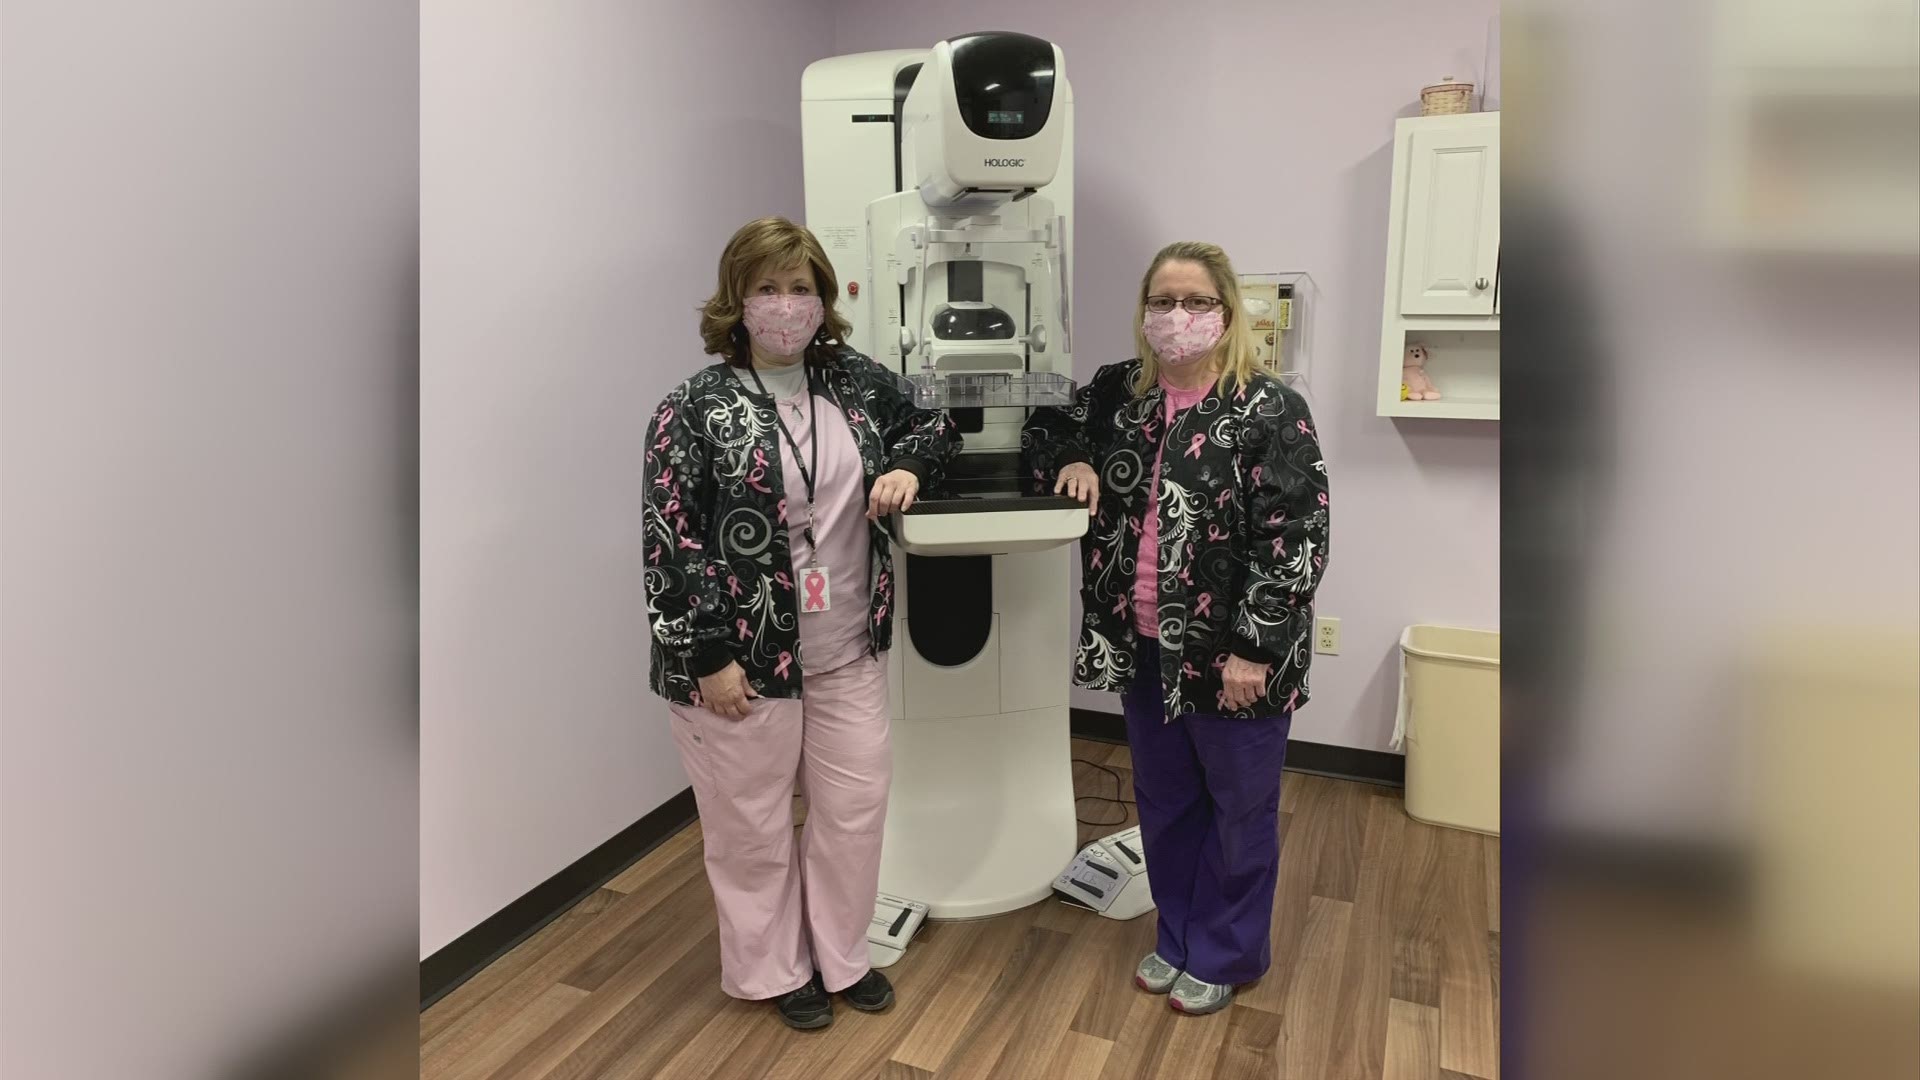 The new screening technology, Tomosynthesis, is more accurate and can help reduce false-positives that normal mammograms can give.